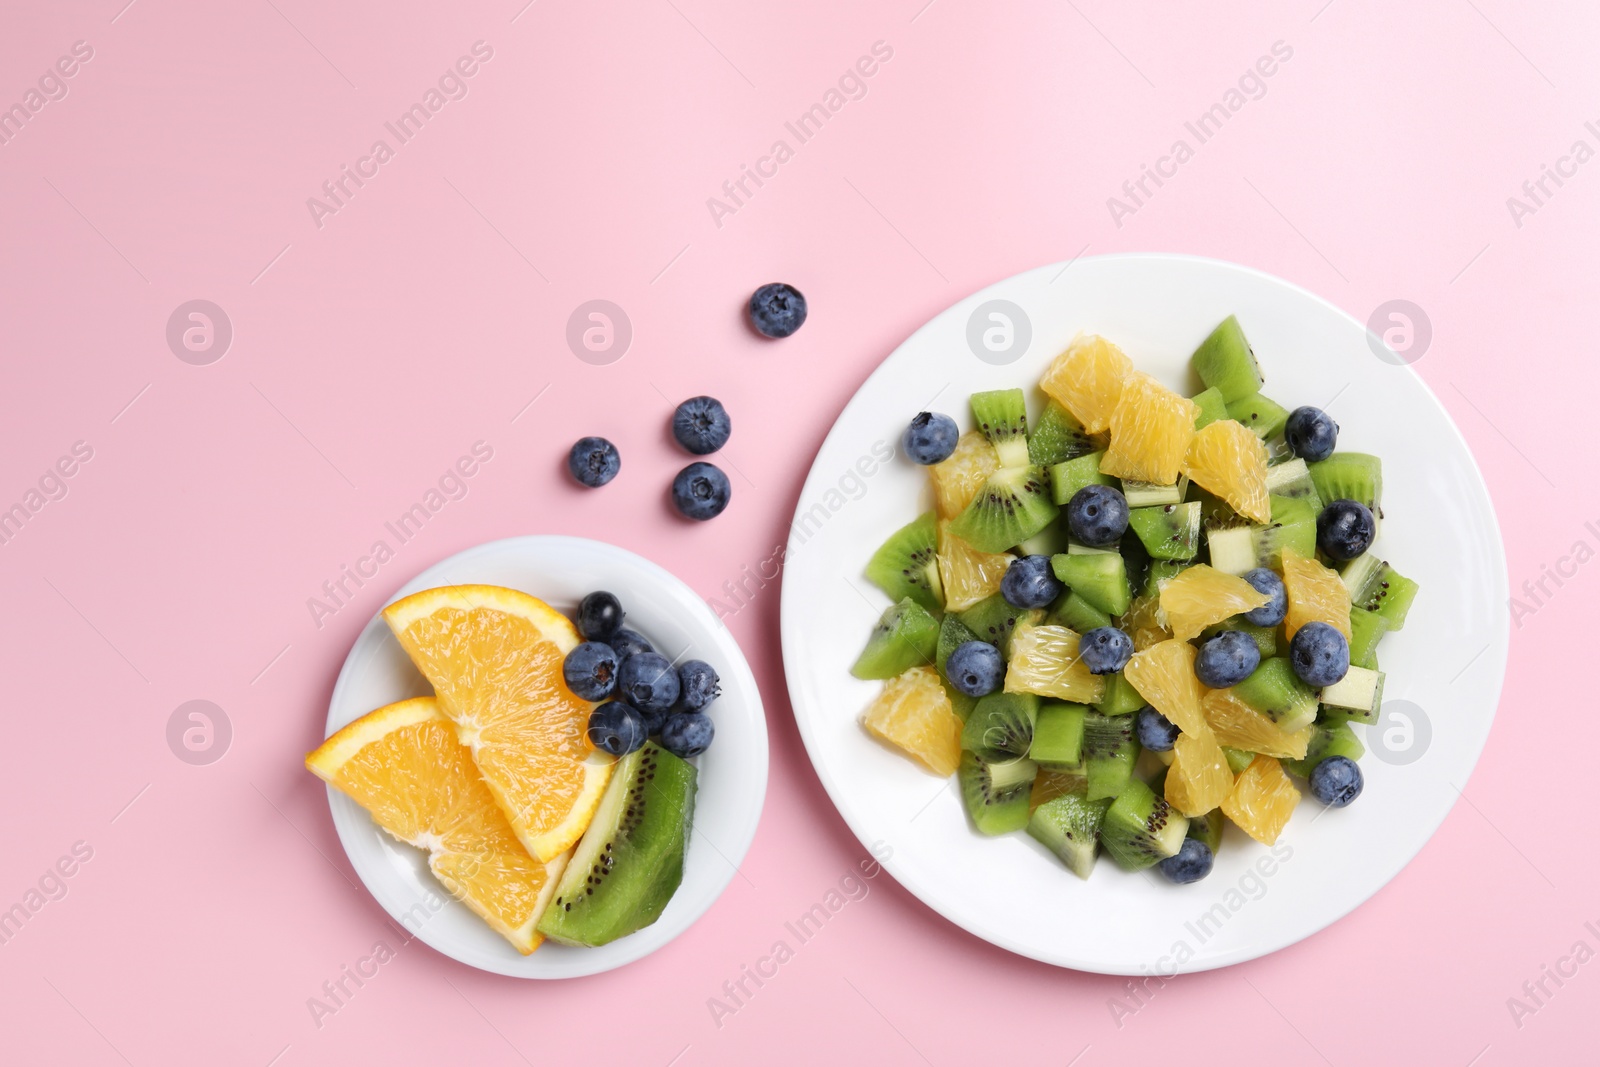 Photo of Plate of tasty fruit salad and ingredients on pink background, flat lay